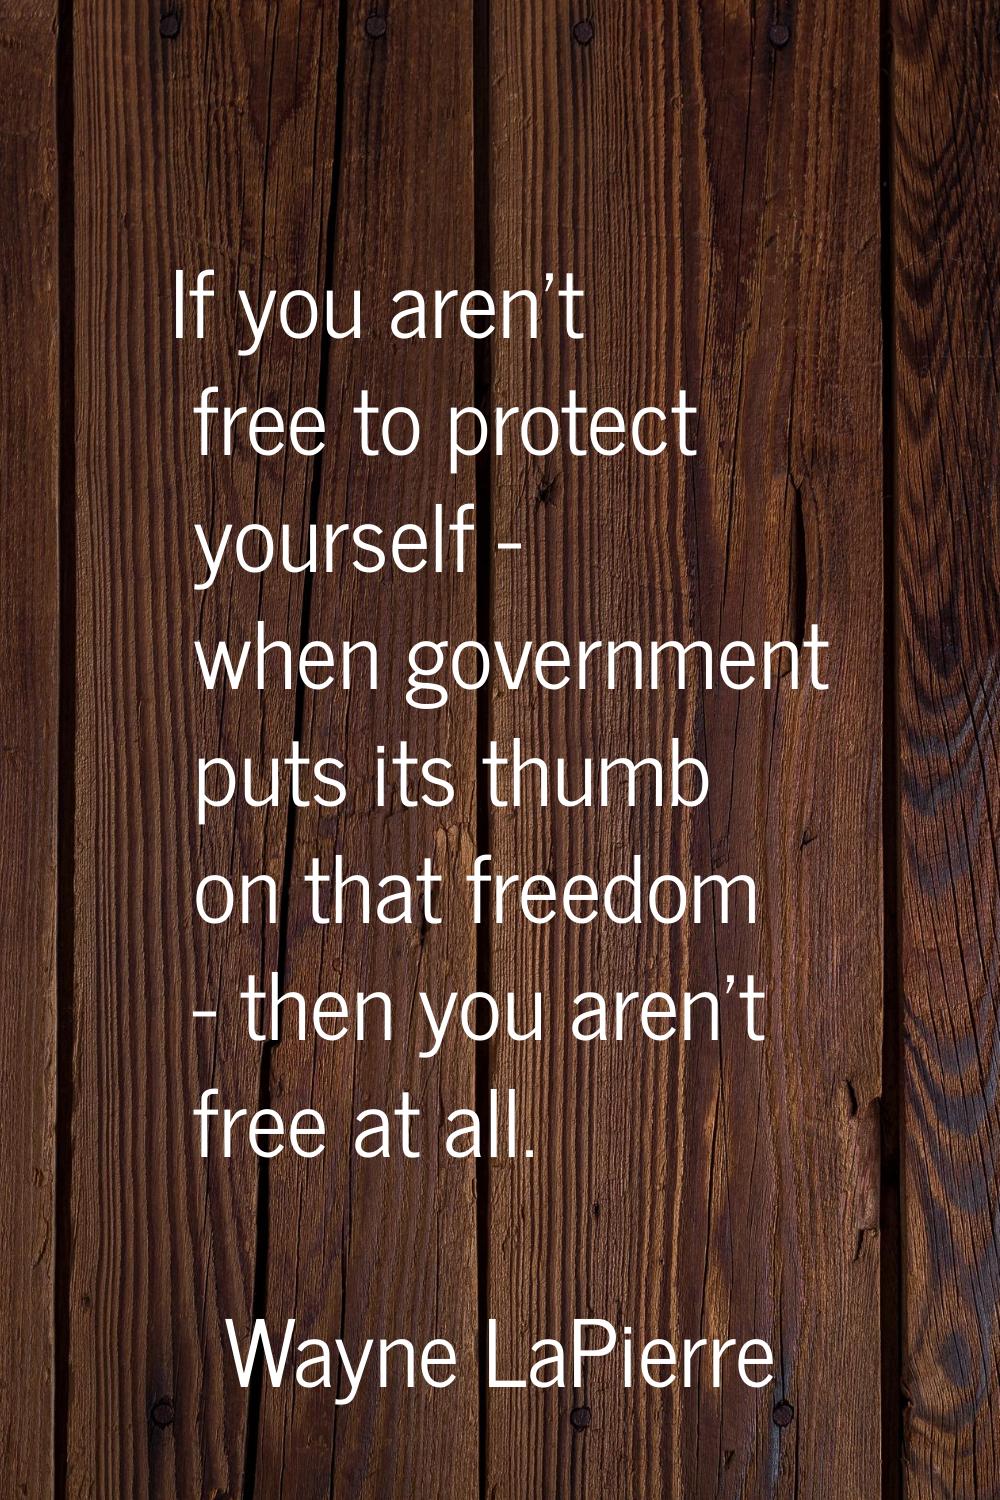 If you aren't free to protect yourself - when government puts its thumb on that freedom - then you 